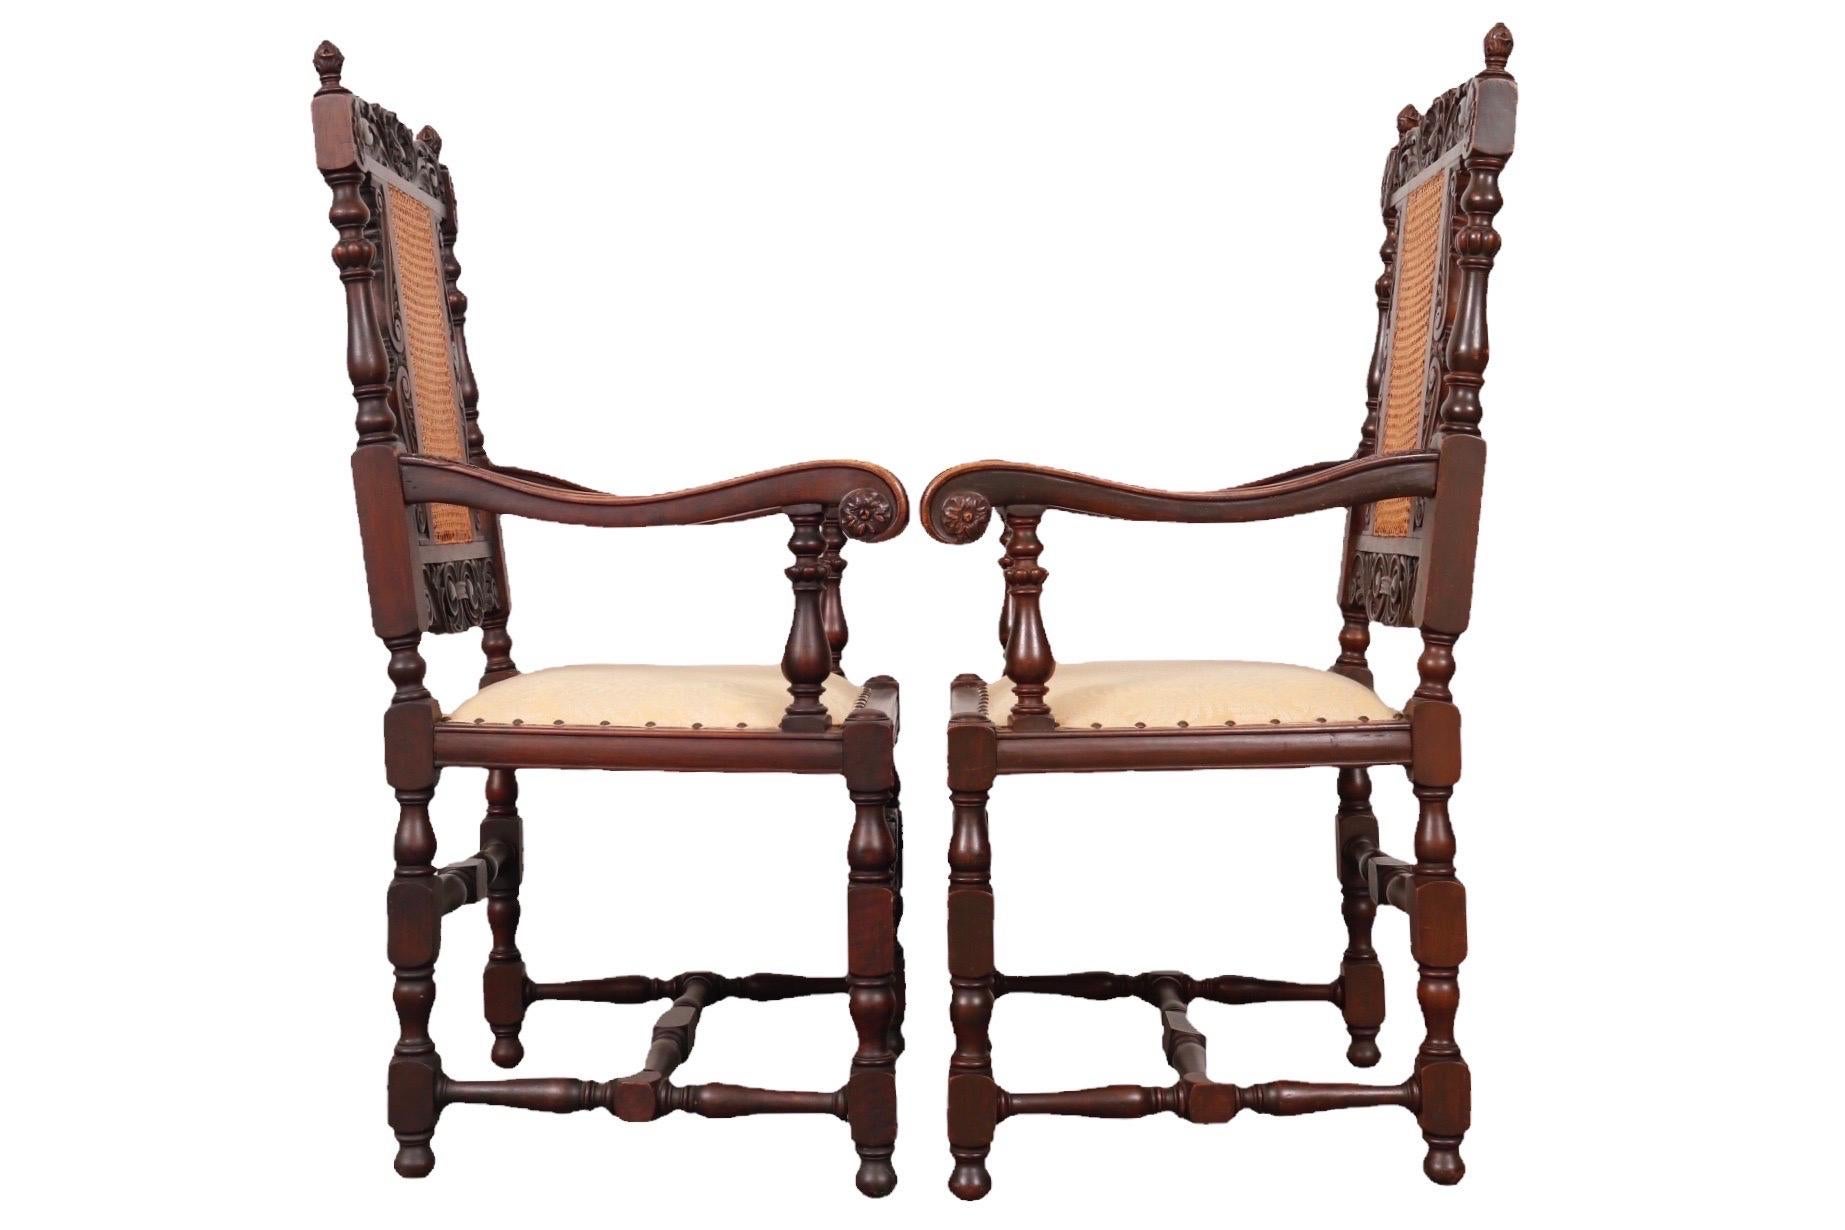 A pair of ornately carved Jacobean style armchairs. Back splats are double caned and topped with scrolled acanthus leaves each side of a central scallop shell. Square seats are upholstered with a light yellow fern damask secured with nailheads.